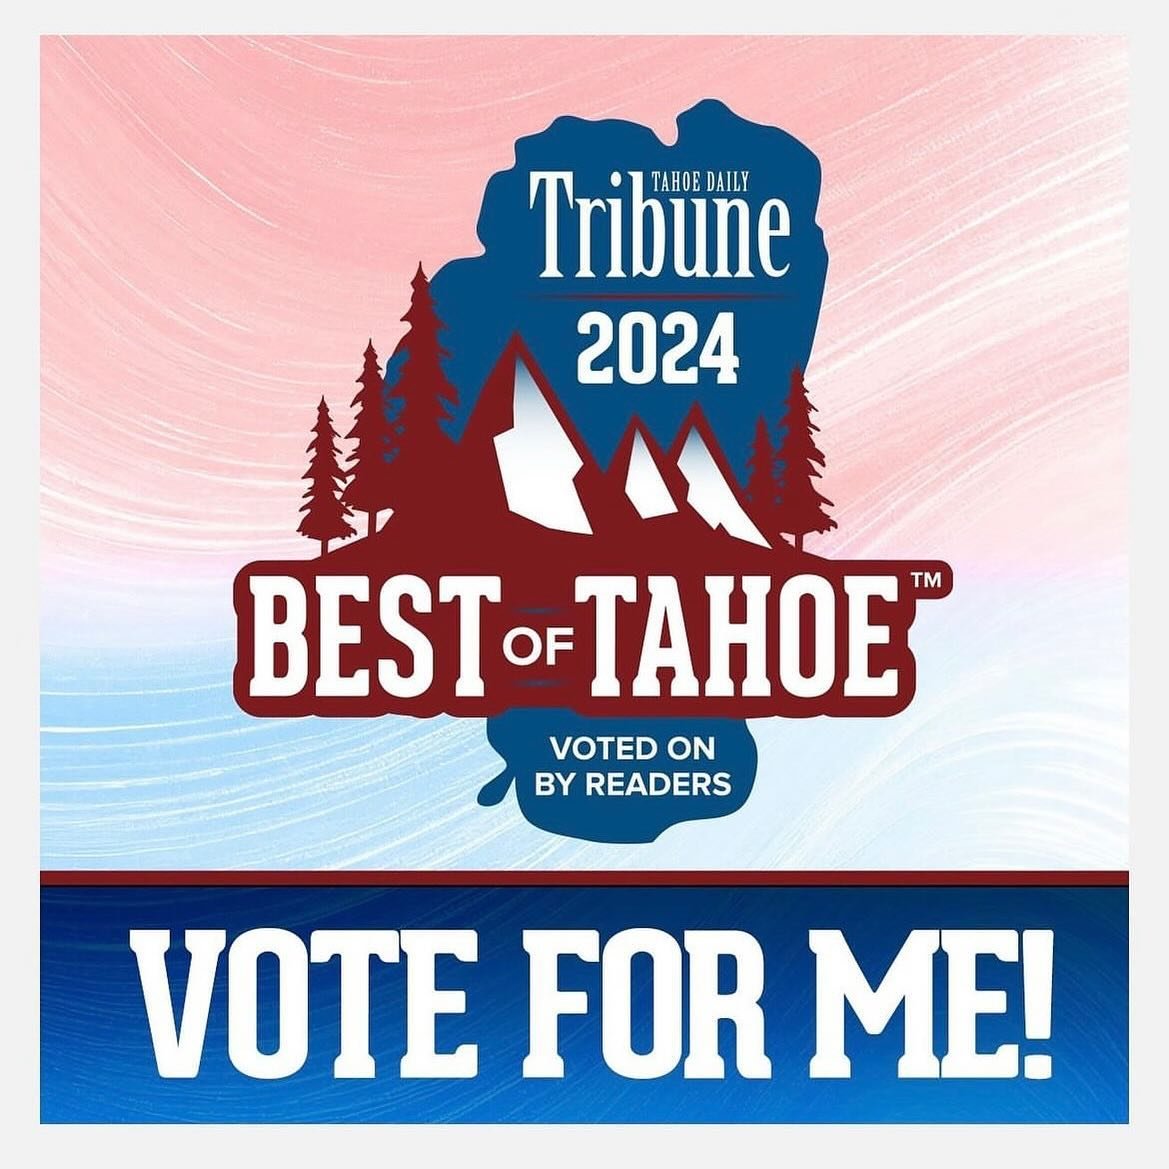 🌟 I am deeply honored to be recognized amongst the Best of Tahoe this year. For me, the real victory goes beyond any award&mdash;it&rsquo;s in seeing my dreams come to life, in feeling the impact of Sattva Wellness Center rooted deeply within our co